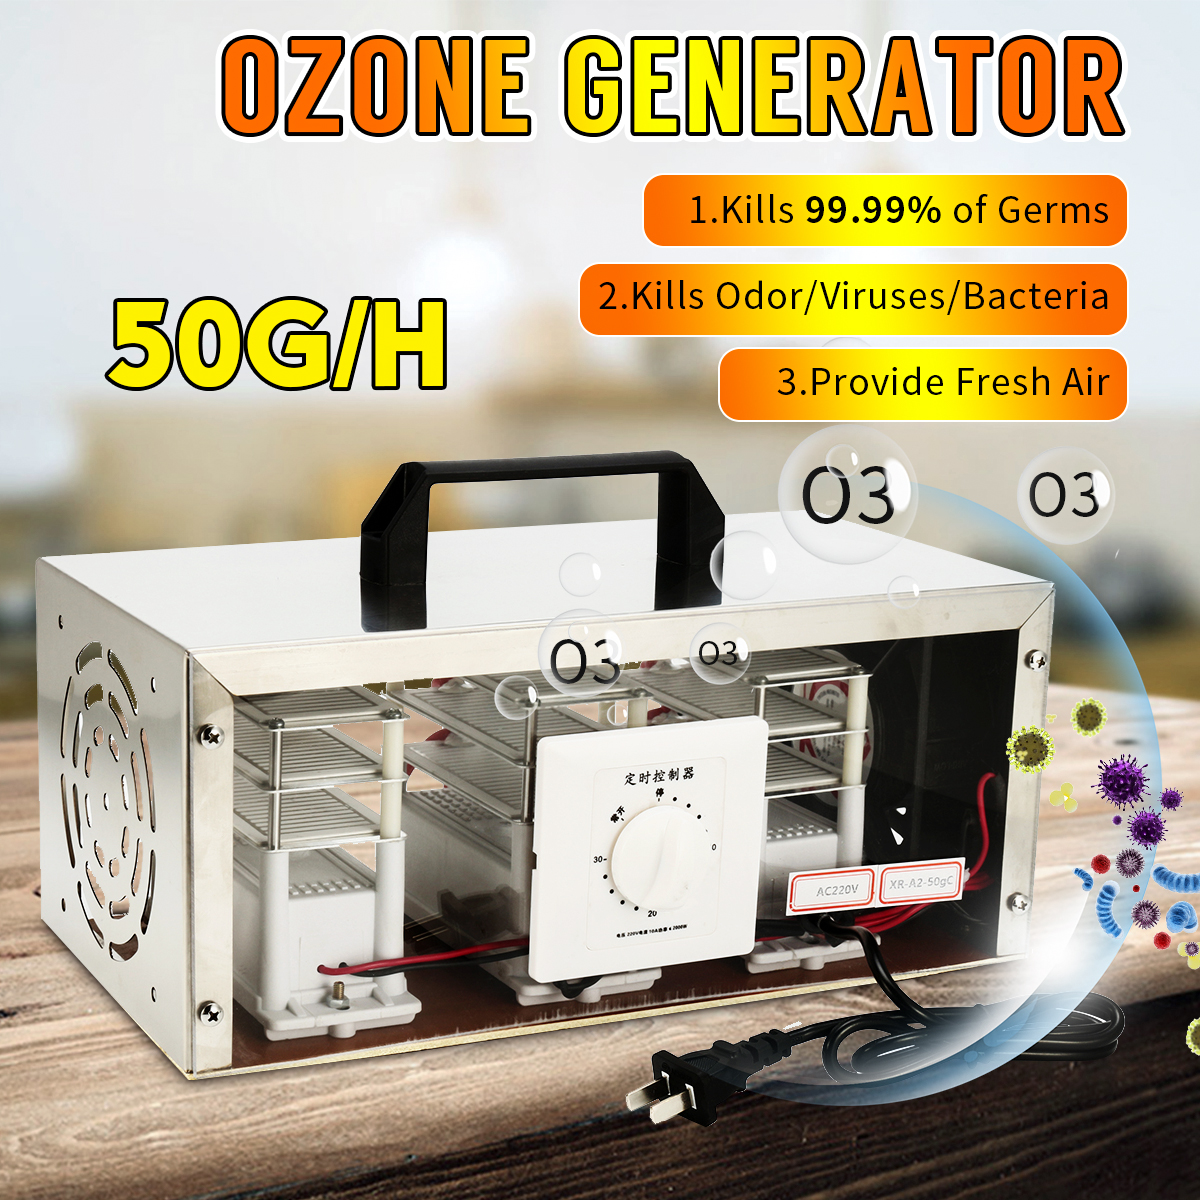 30gh-50gh-220V-Air-Ozone-Generator-Air-Purifier-Sterilizer-With-Timing-Switch-for-Home-Car-Office-Me-1290170-1